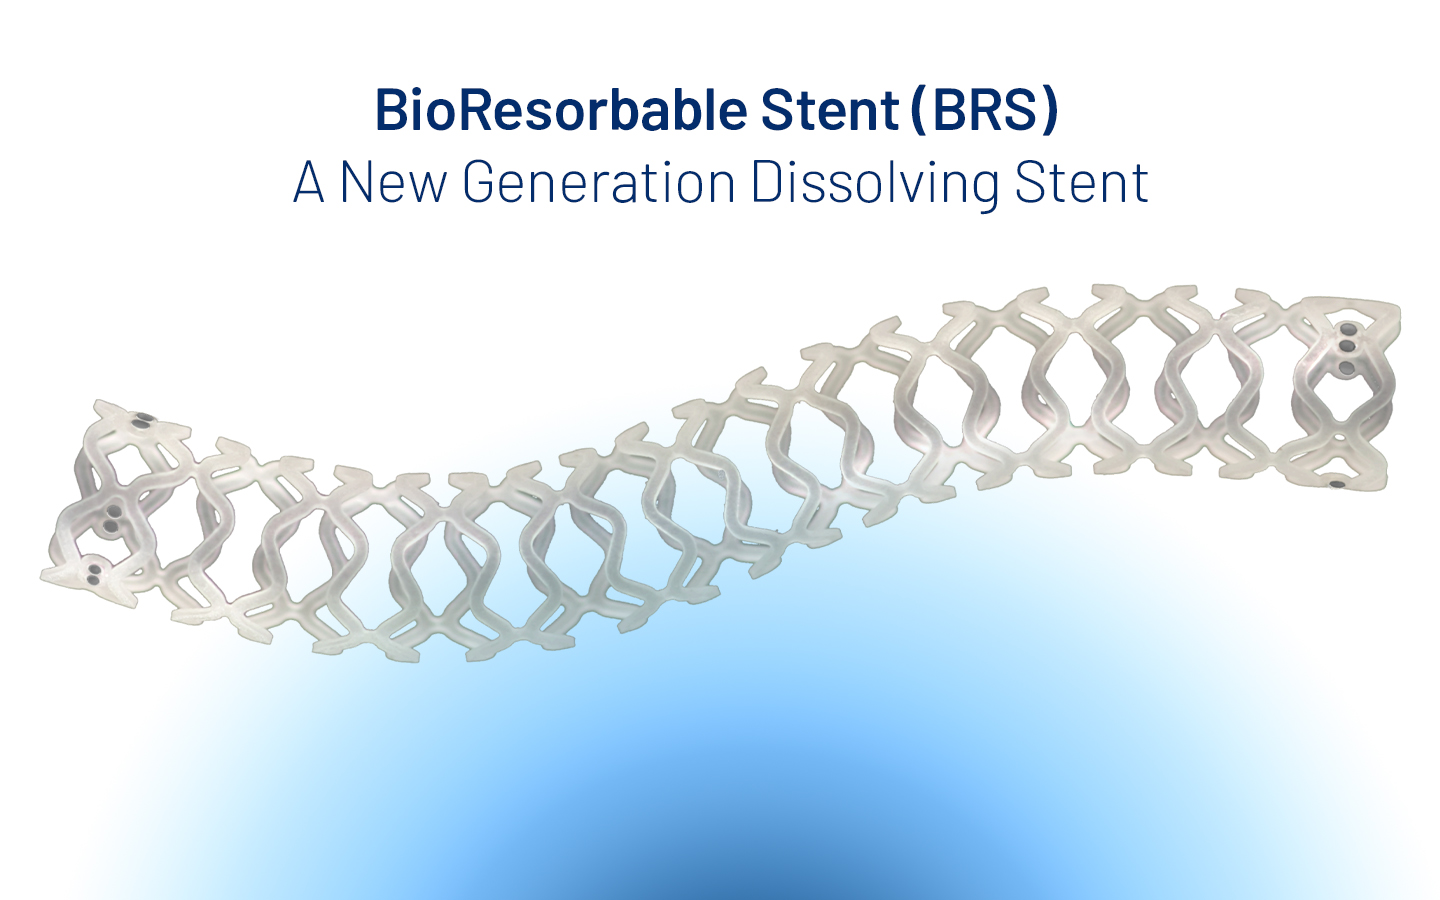 Revolutionizing treatment for Coronary Artery Diseases - A Boon of Bioresorbable Stents for Young Adults